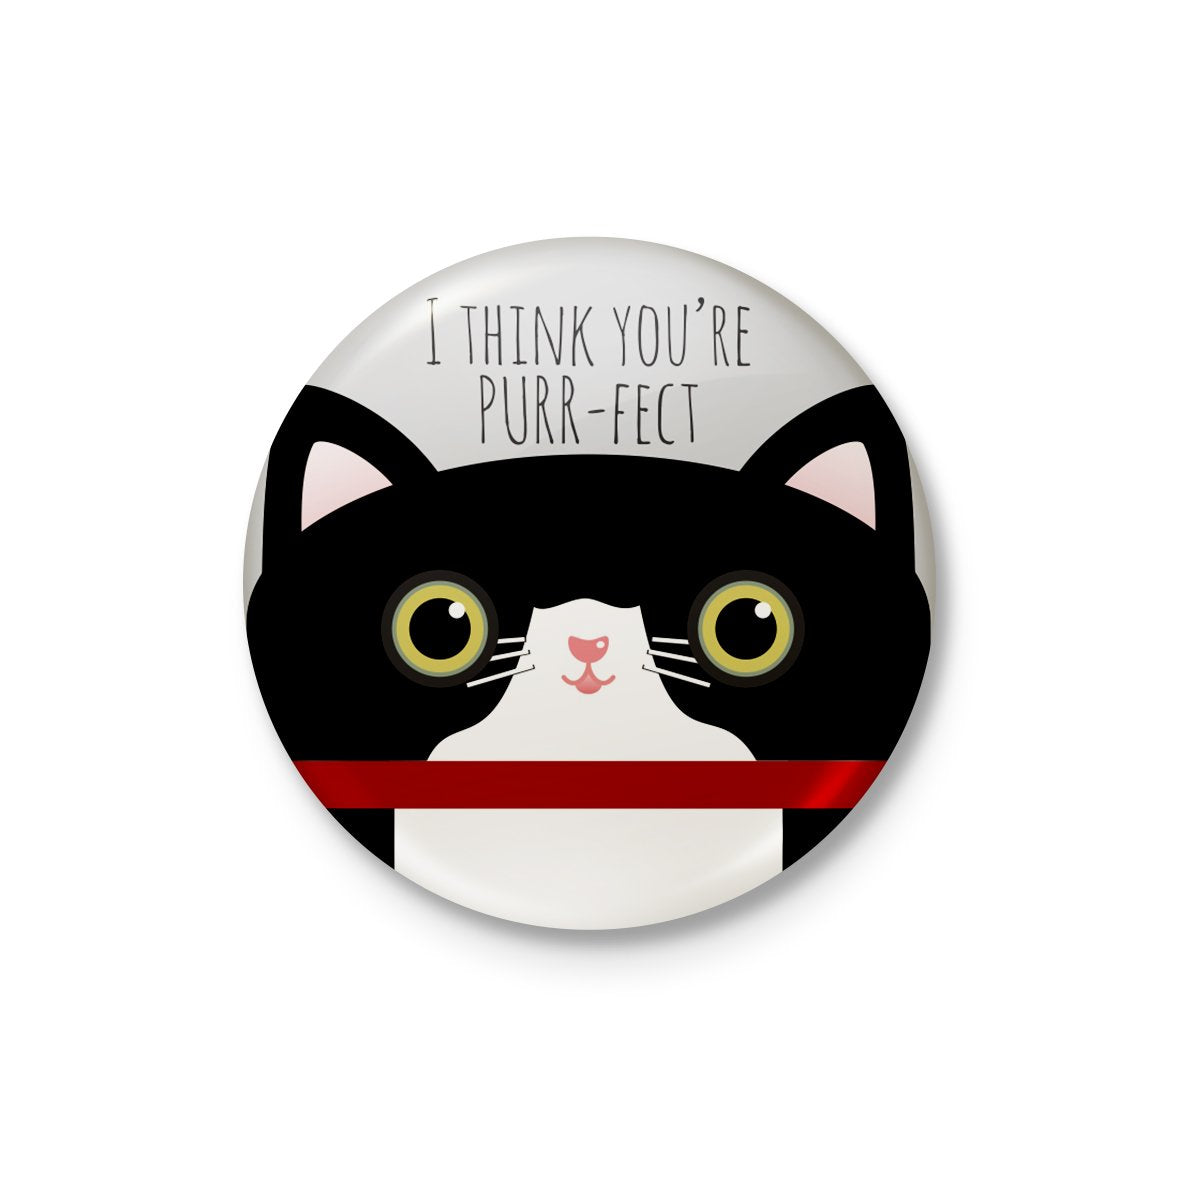 I Think Your purr-fect Badge